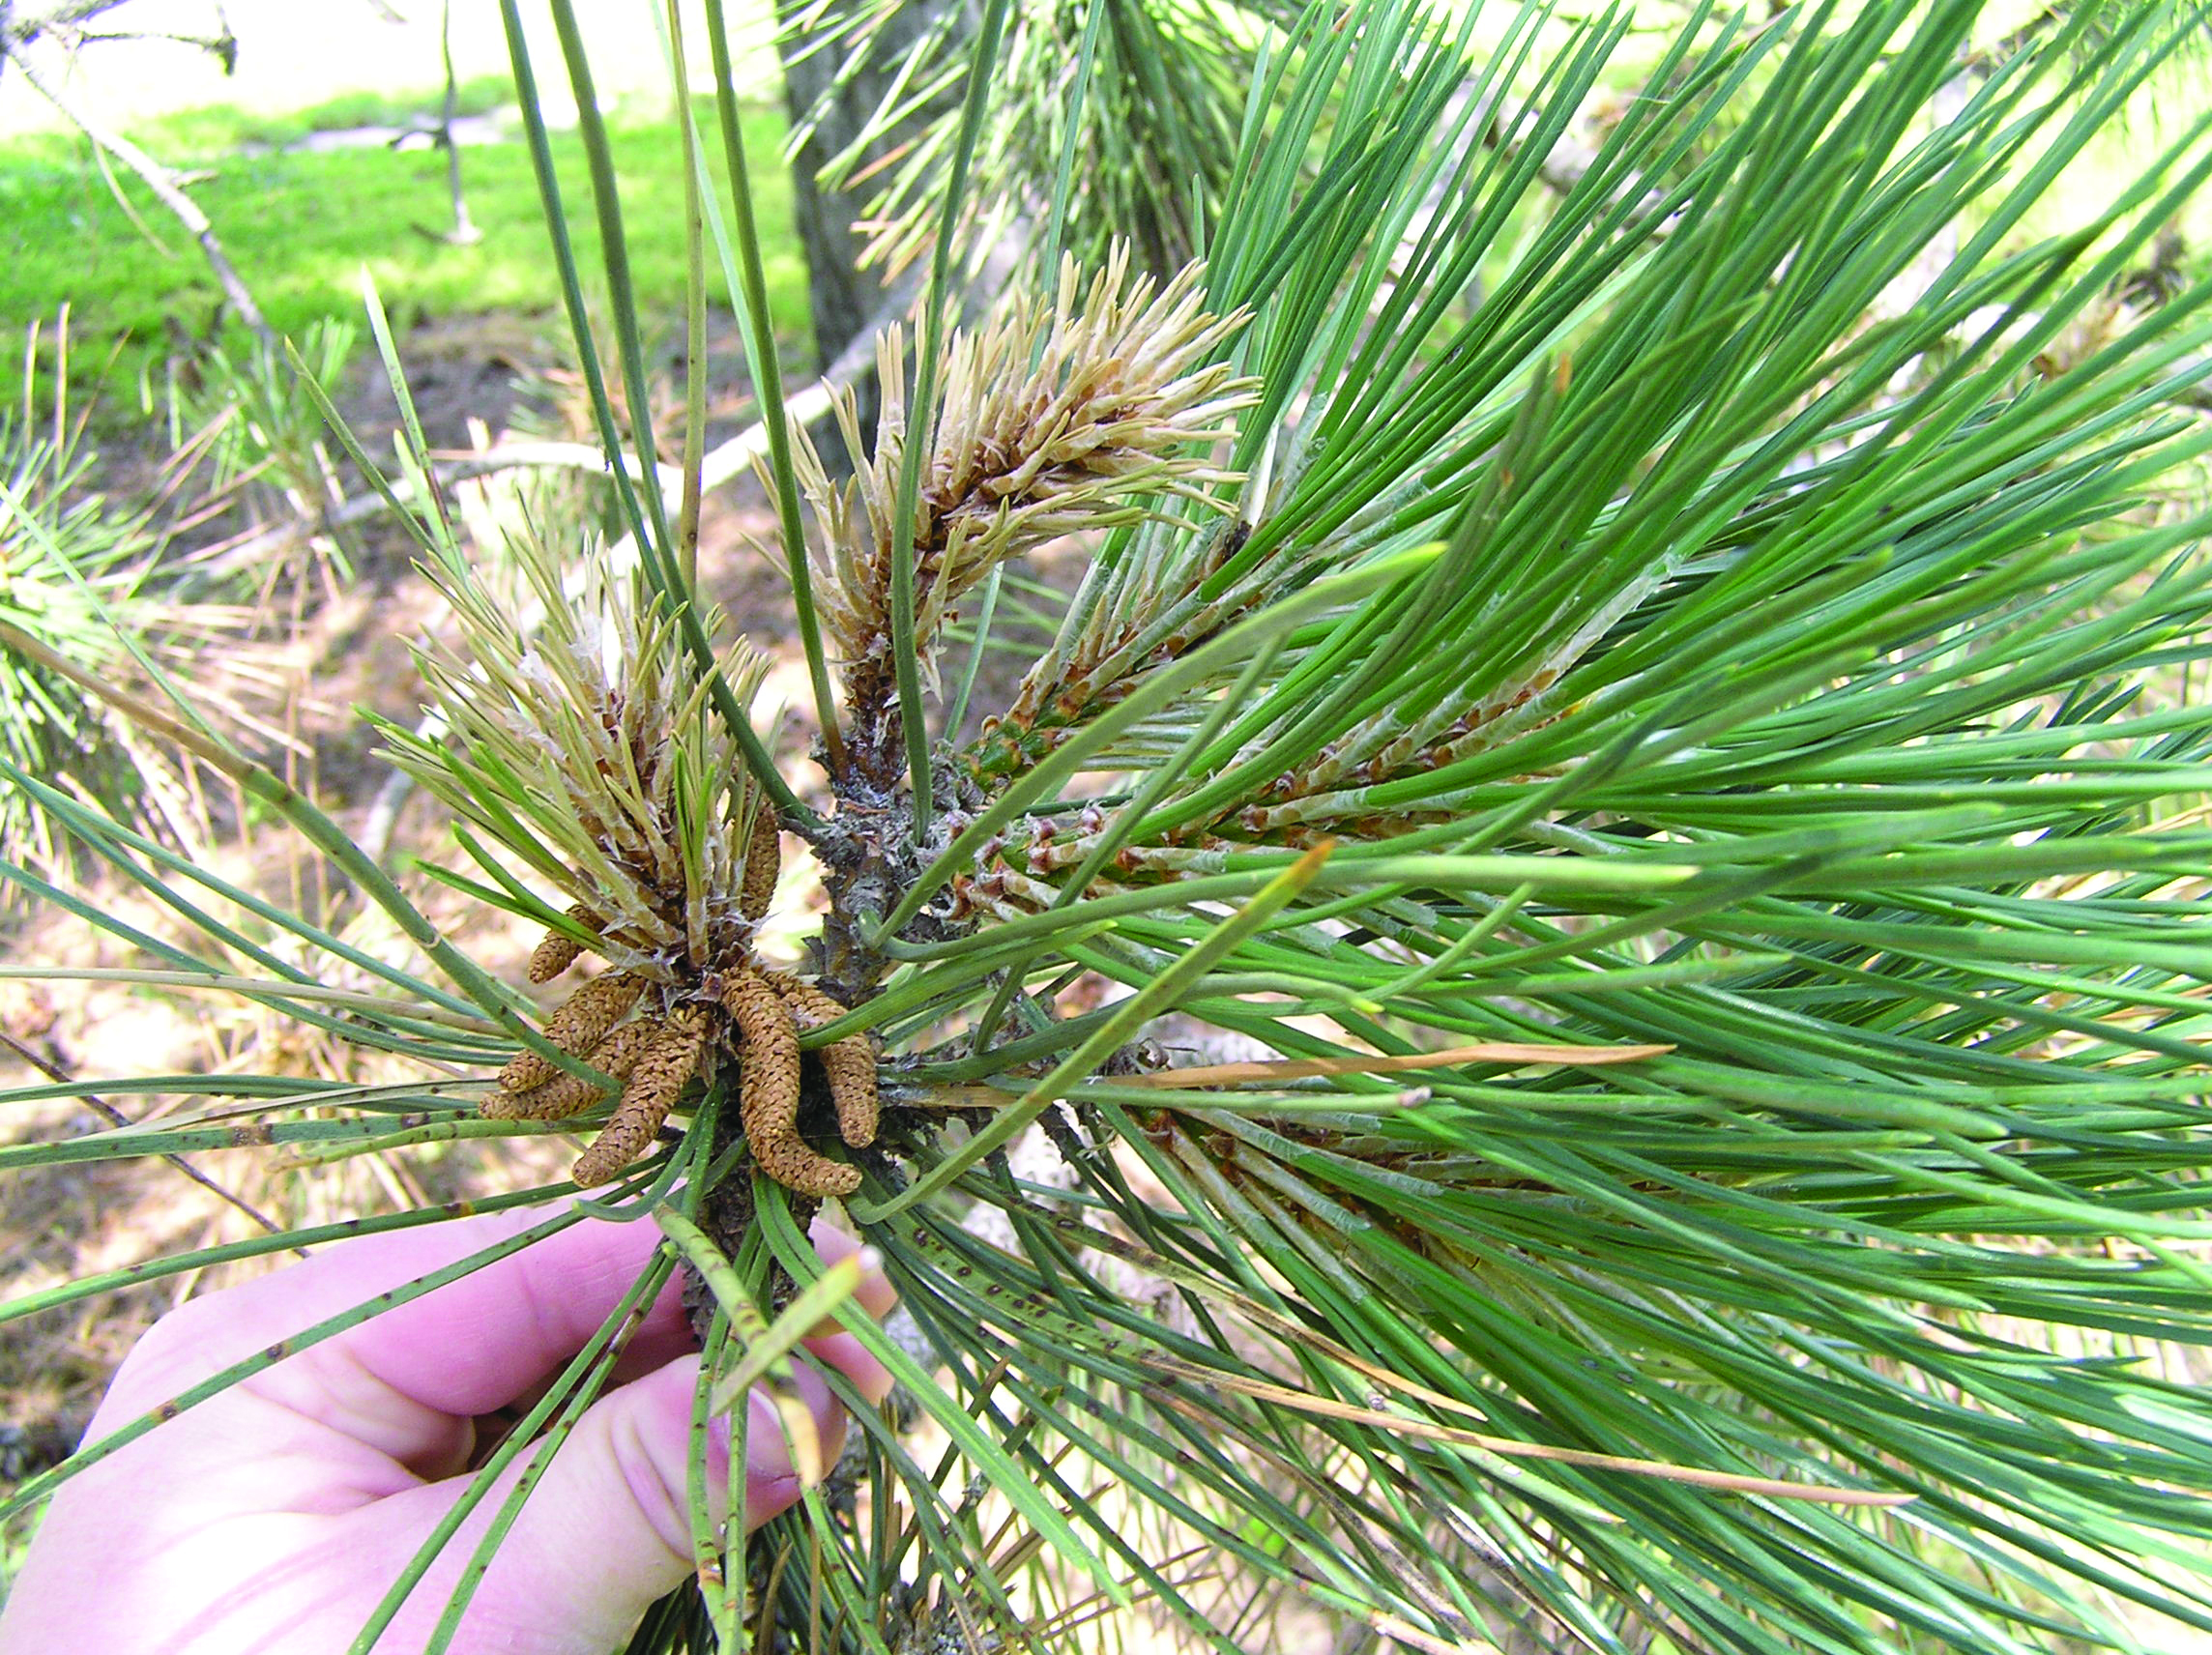 Death of new pine shoots, also called "candles,” are a symptom used to identify Diplodia tip blight. (Inset photo) Very serious Diplodia infection can result in death of entire branches. (Photos by Sarah Browning)